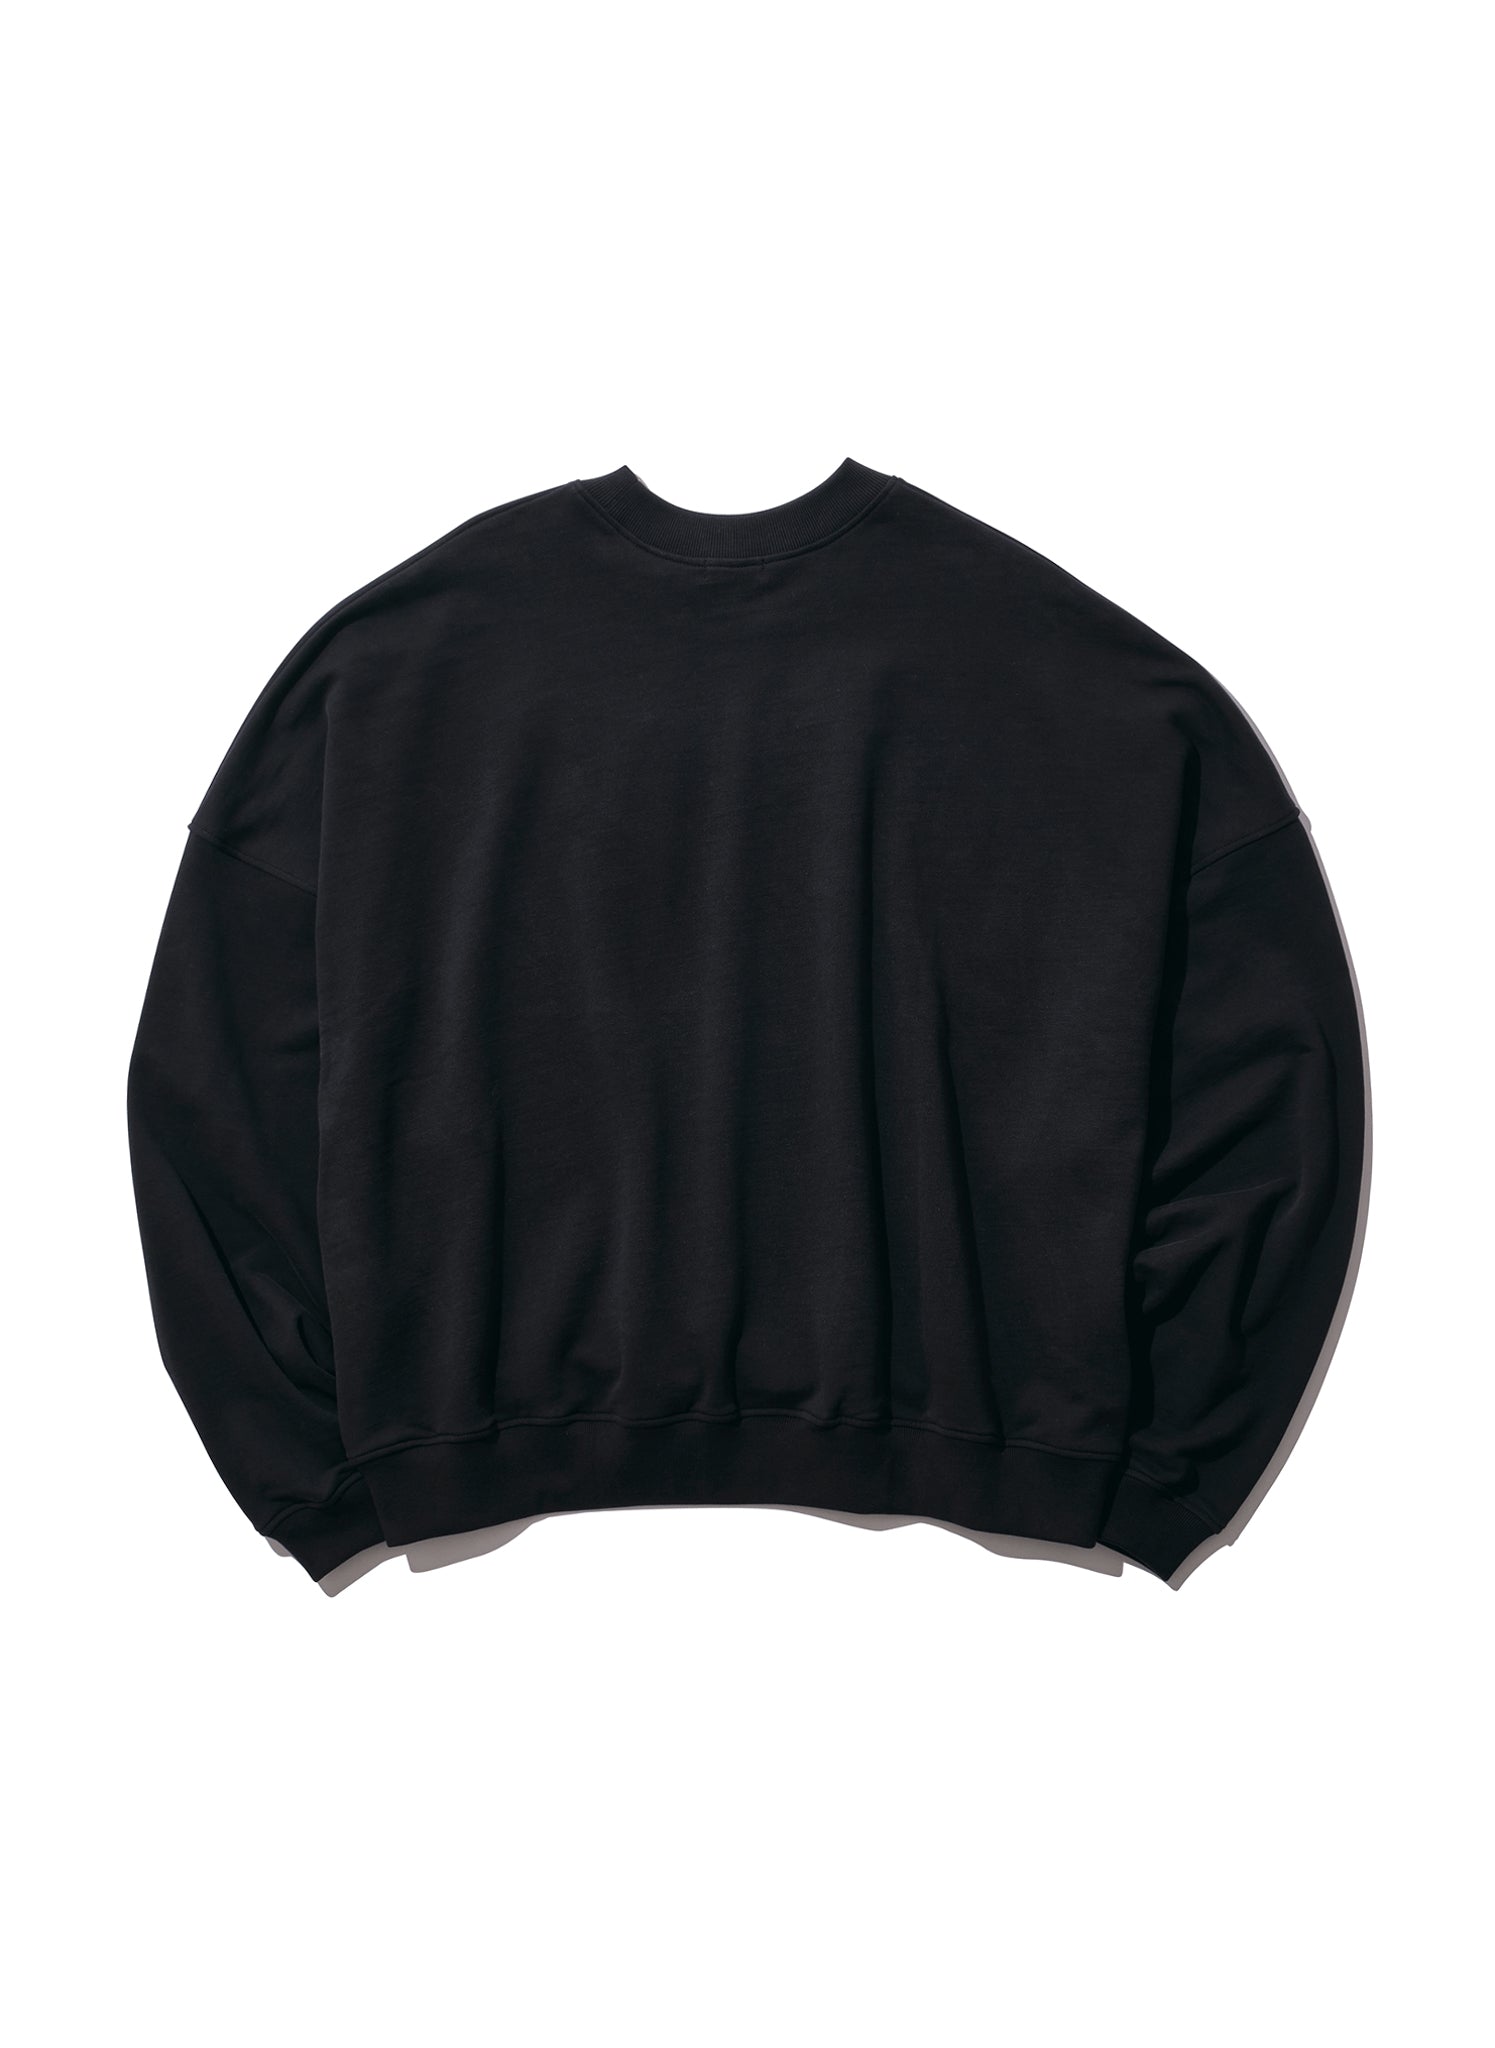 WILLY CHAVARRIA / DEVOTIONAL HEARTS BOMBER CREW SOLID BLACK